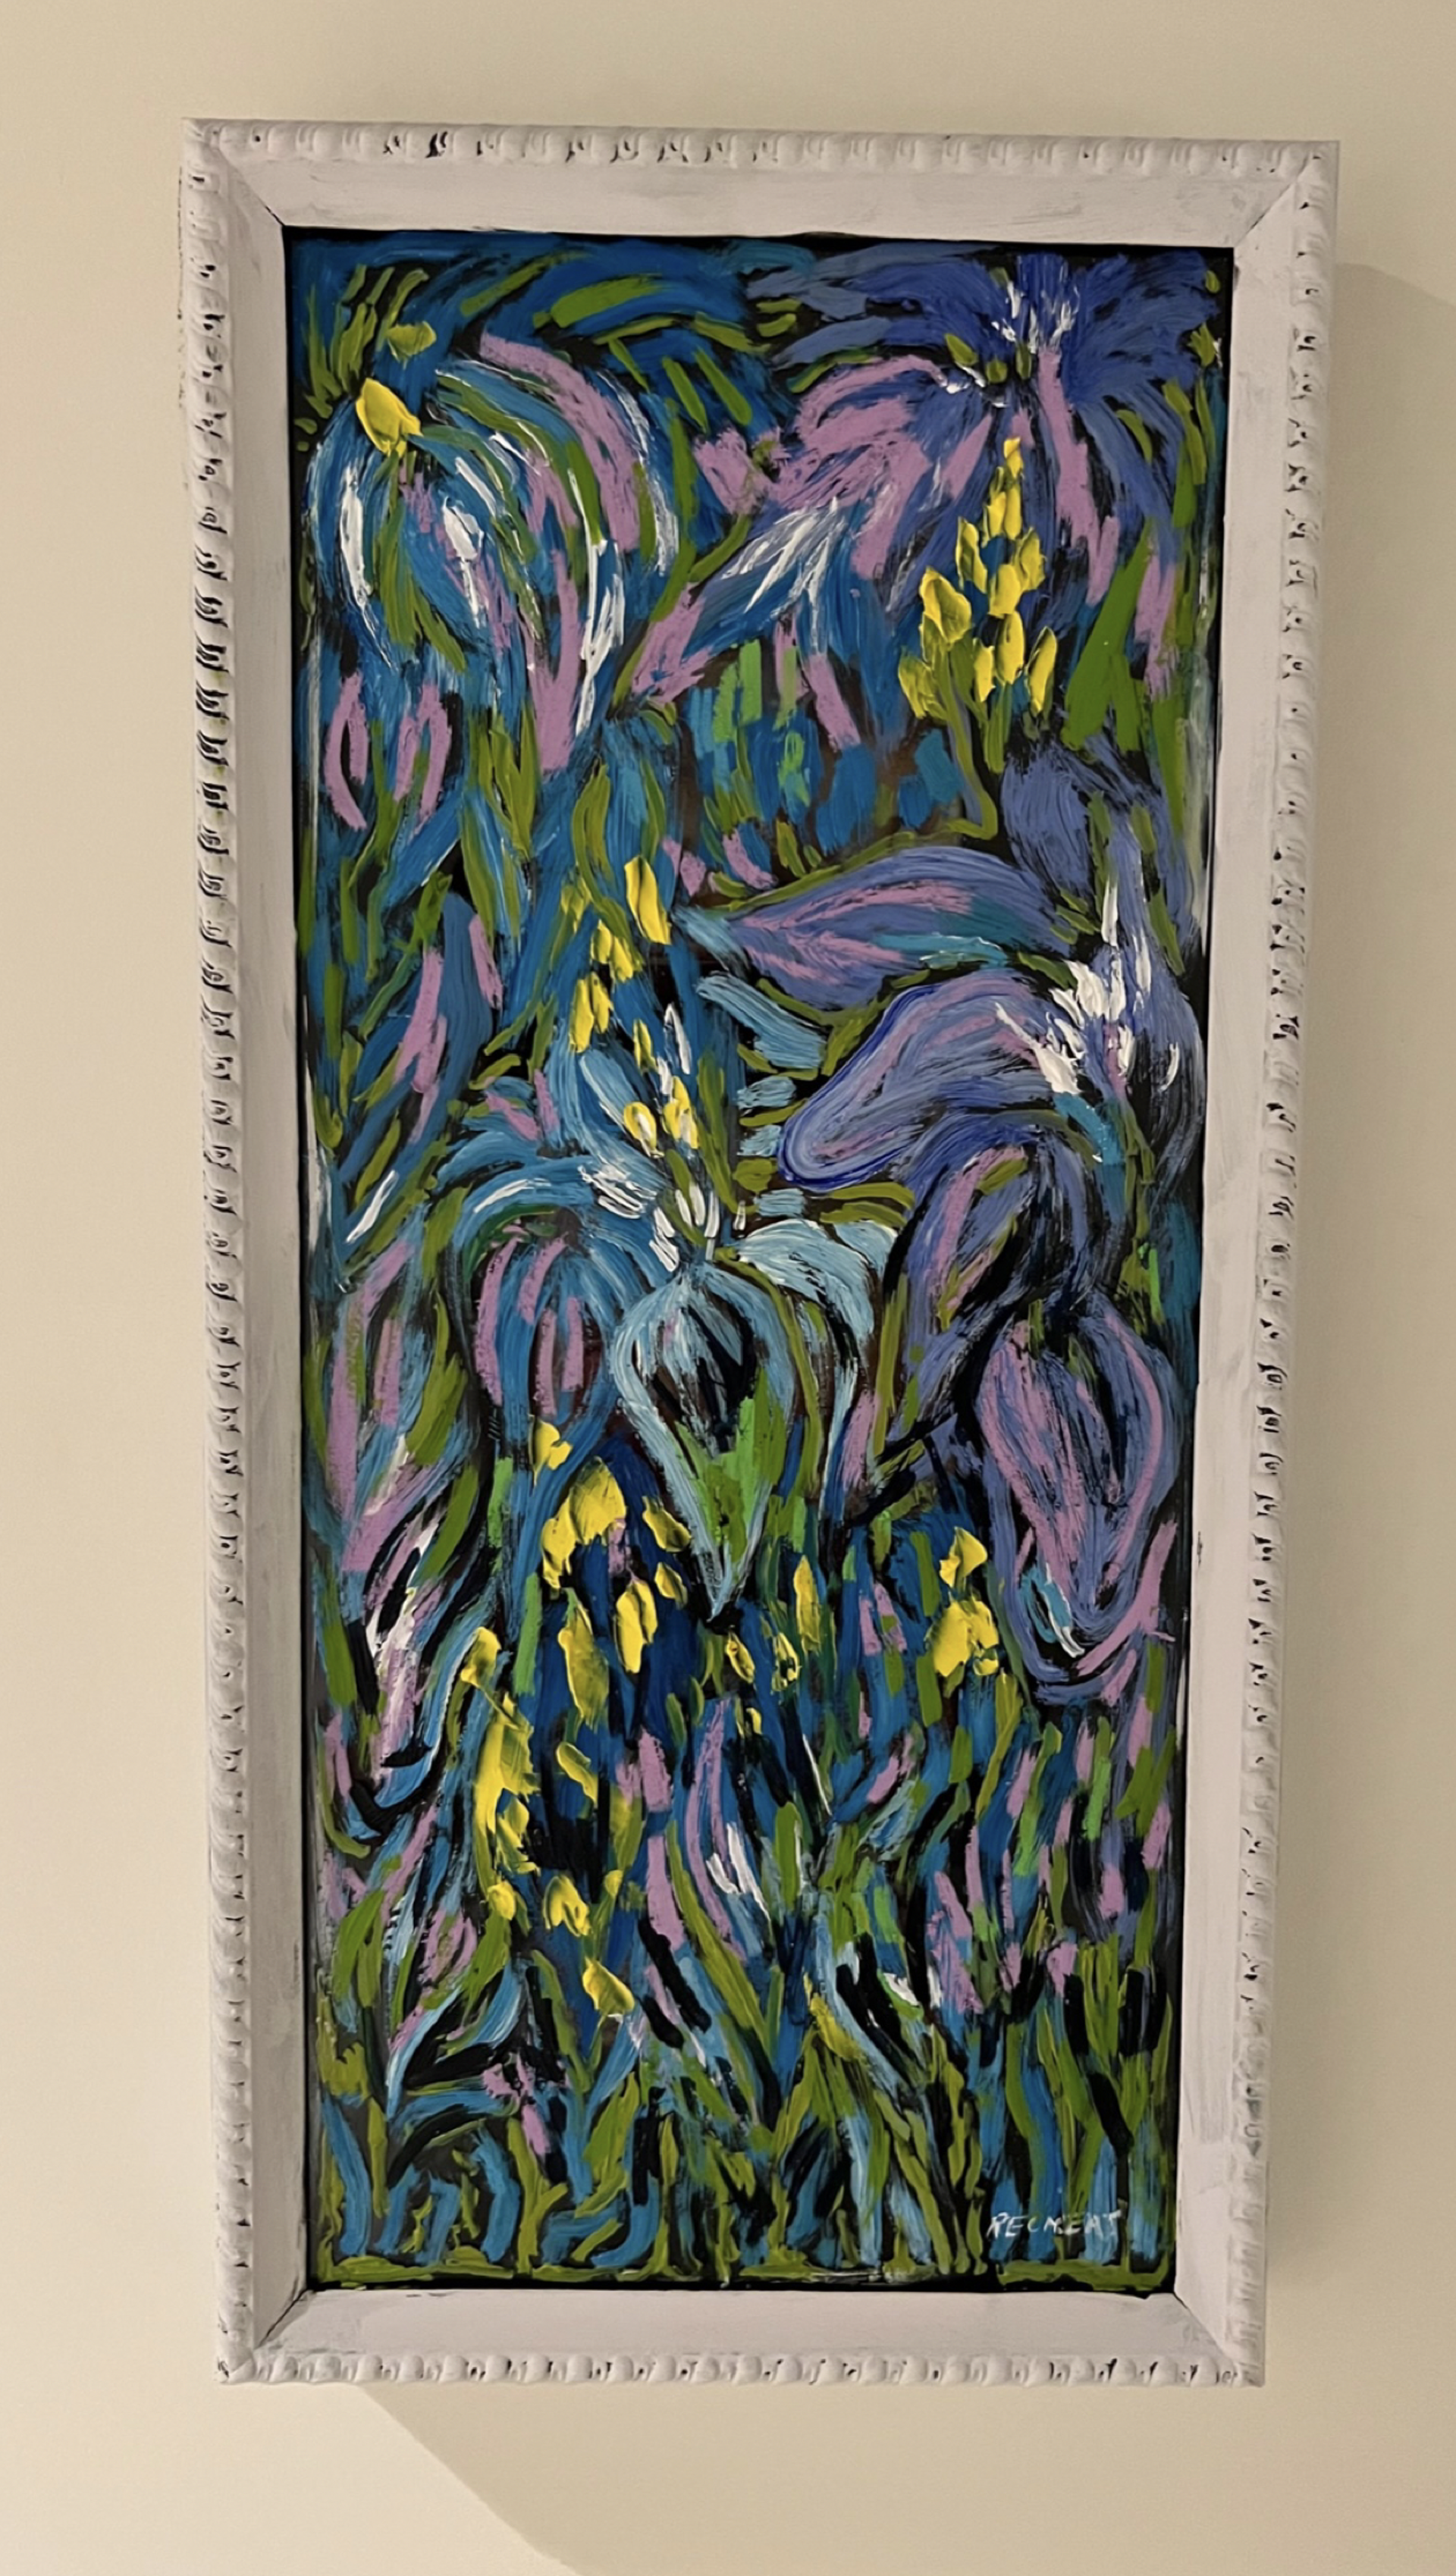 Lillies in Blue by Olivia Reckert